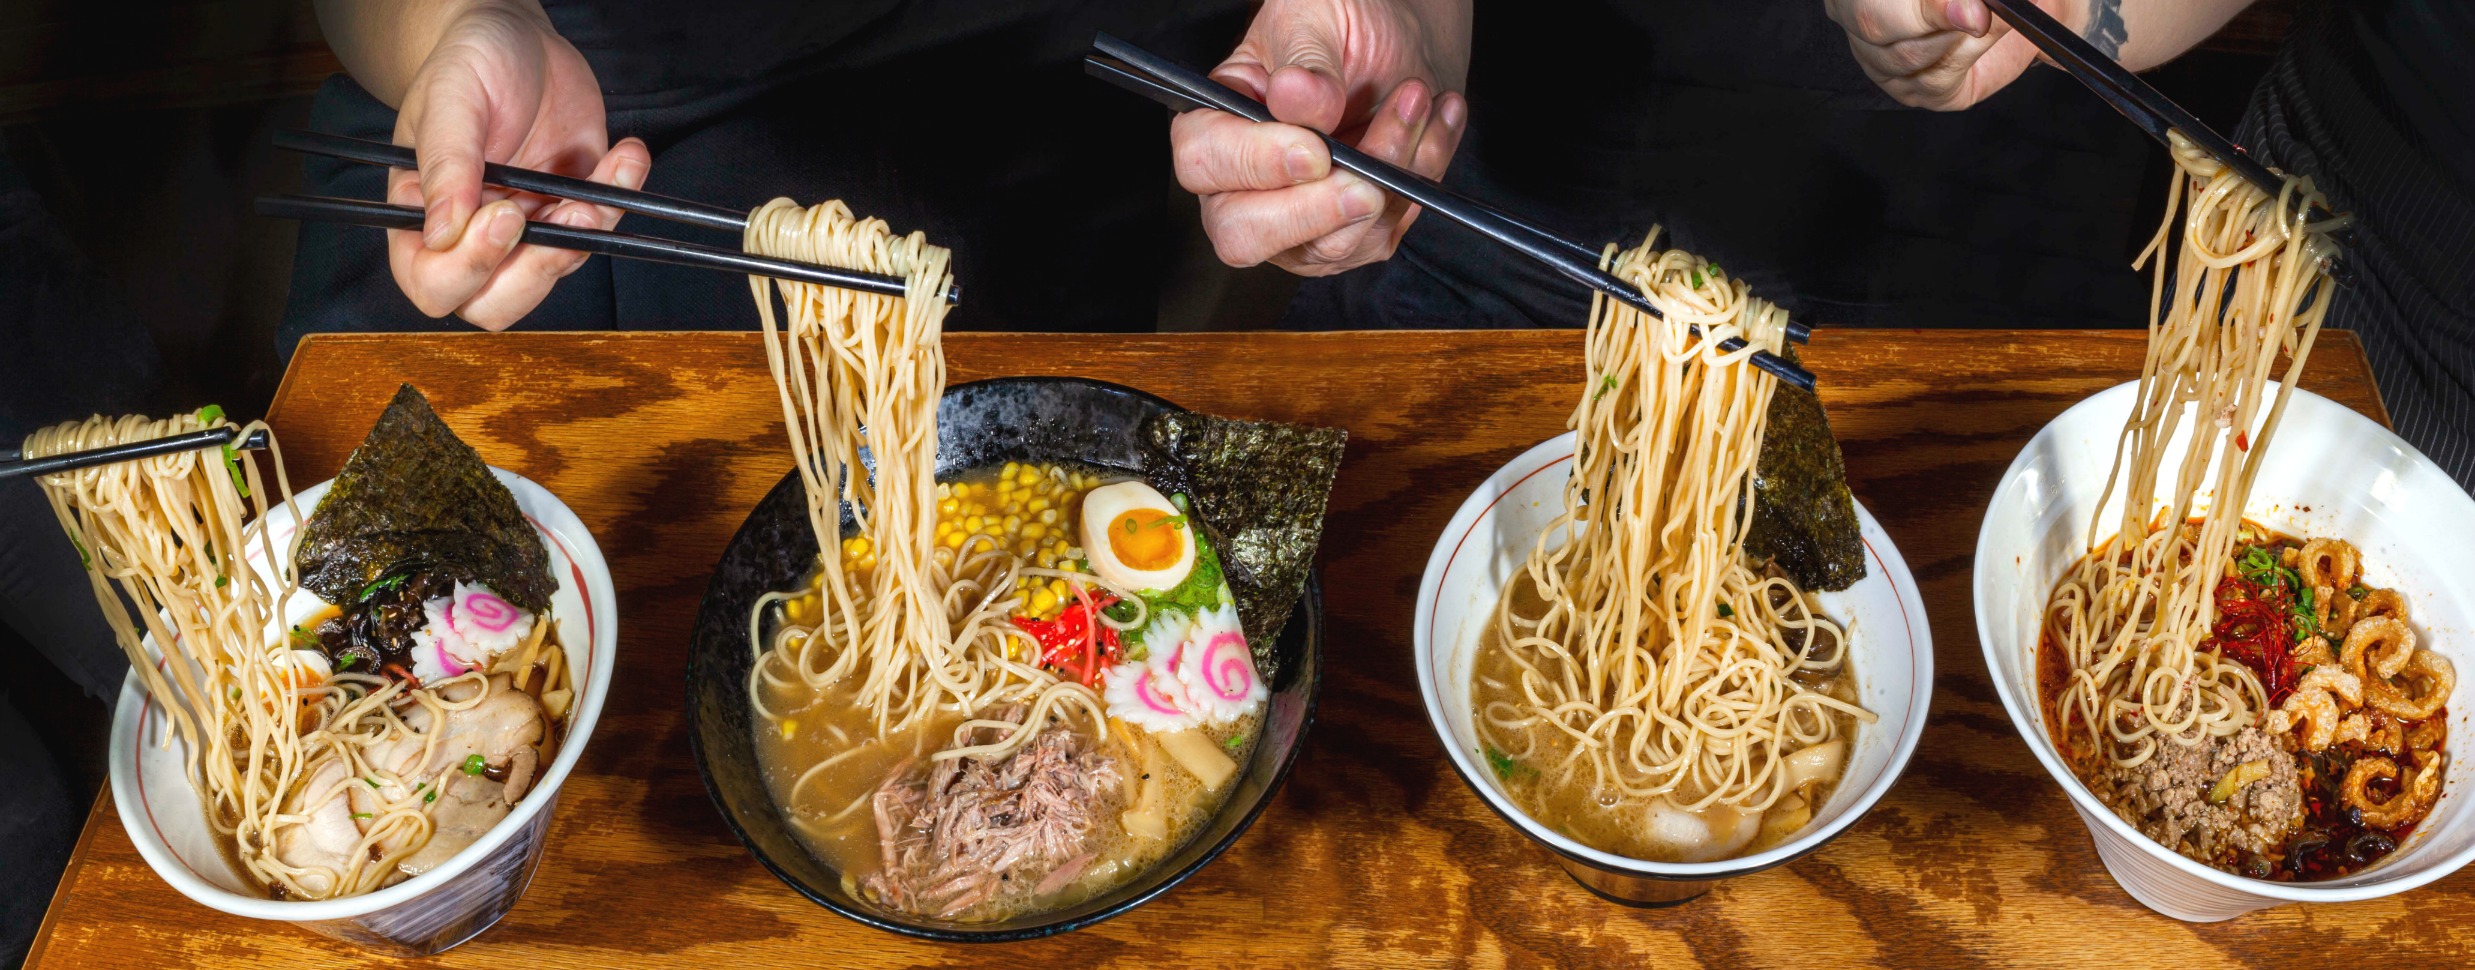 National Noodle Day at Strings Ramen Chicago Food Magazine